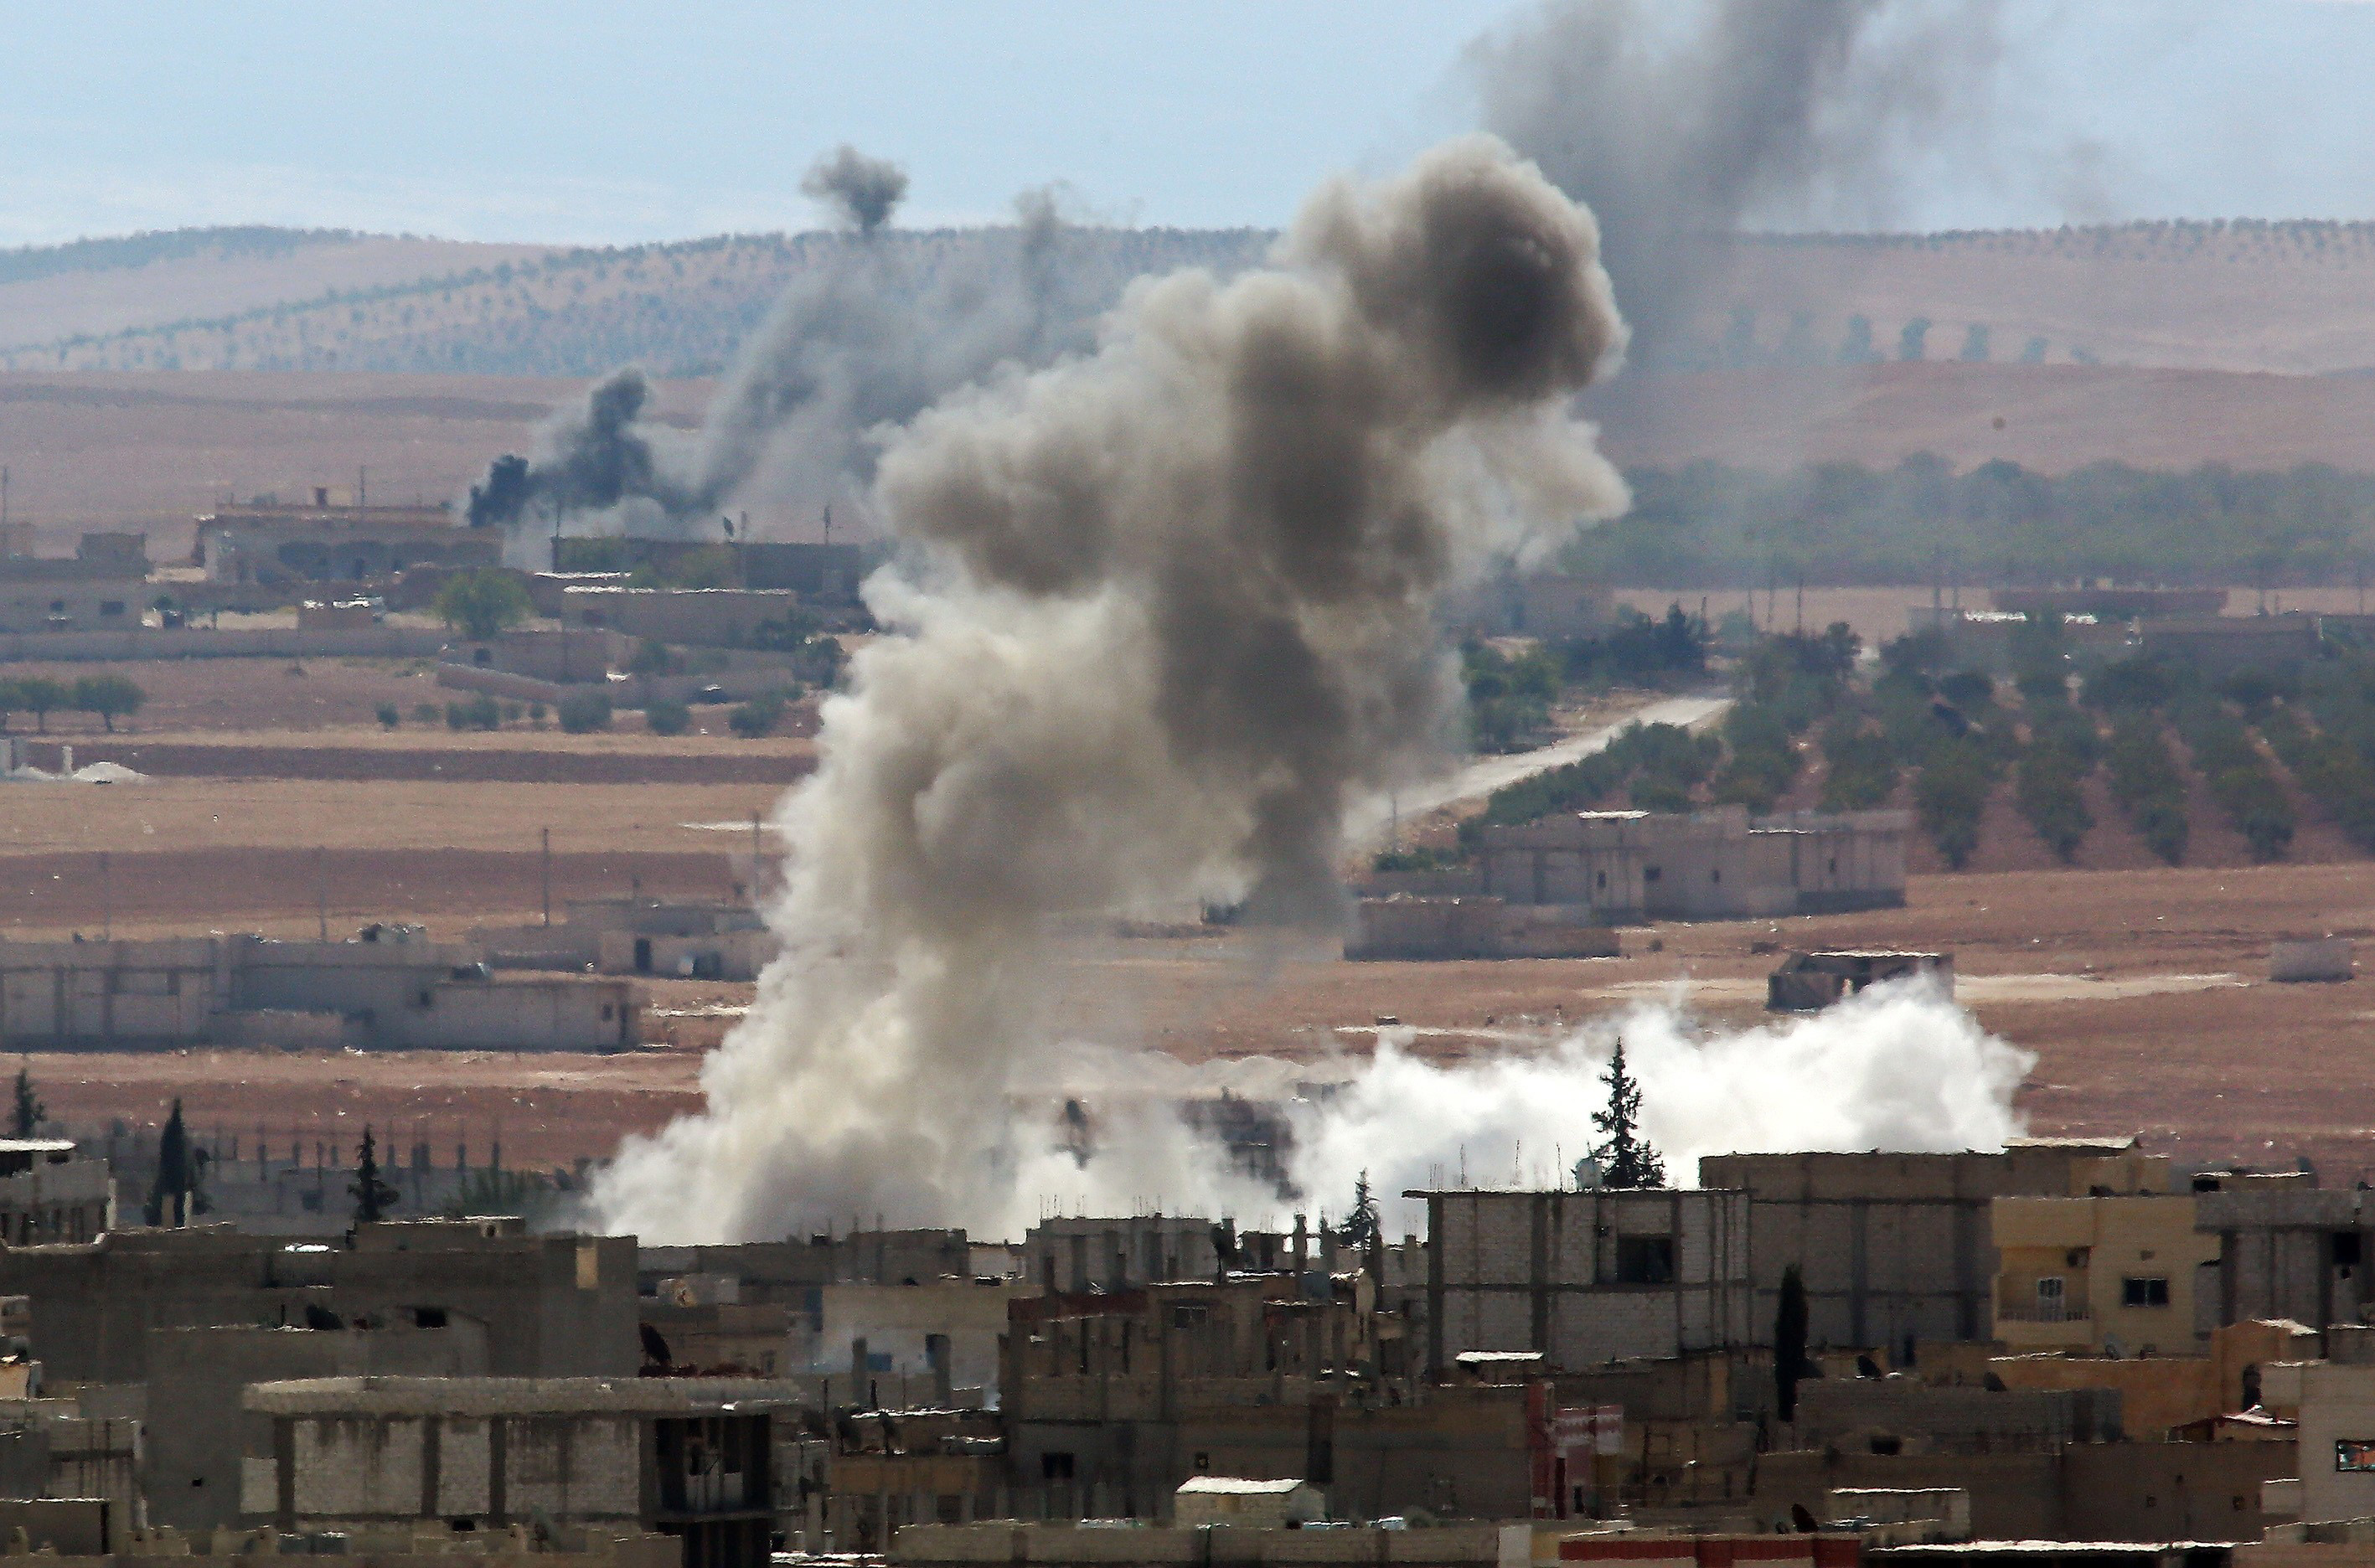 Clashes between ISIL and Kurdish armed groups in Kobane